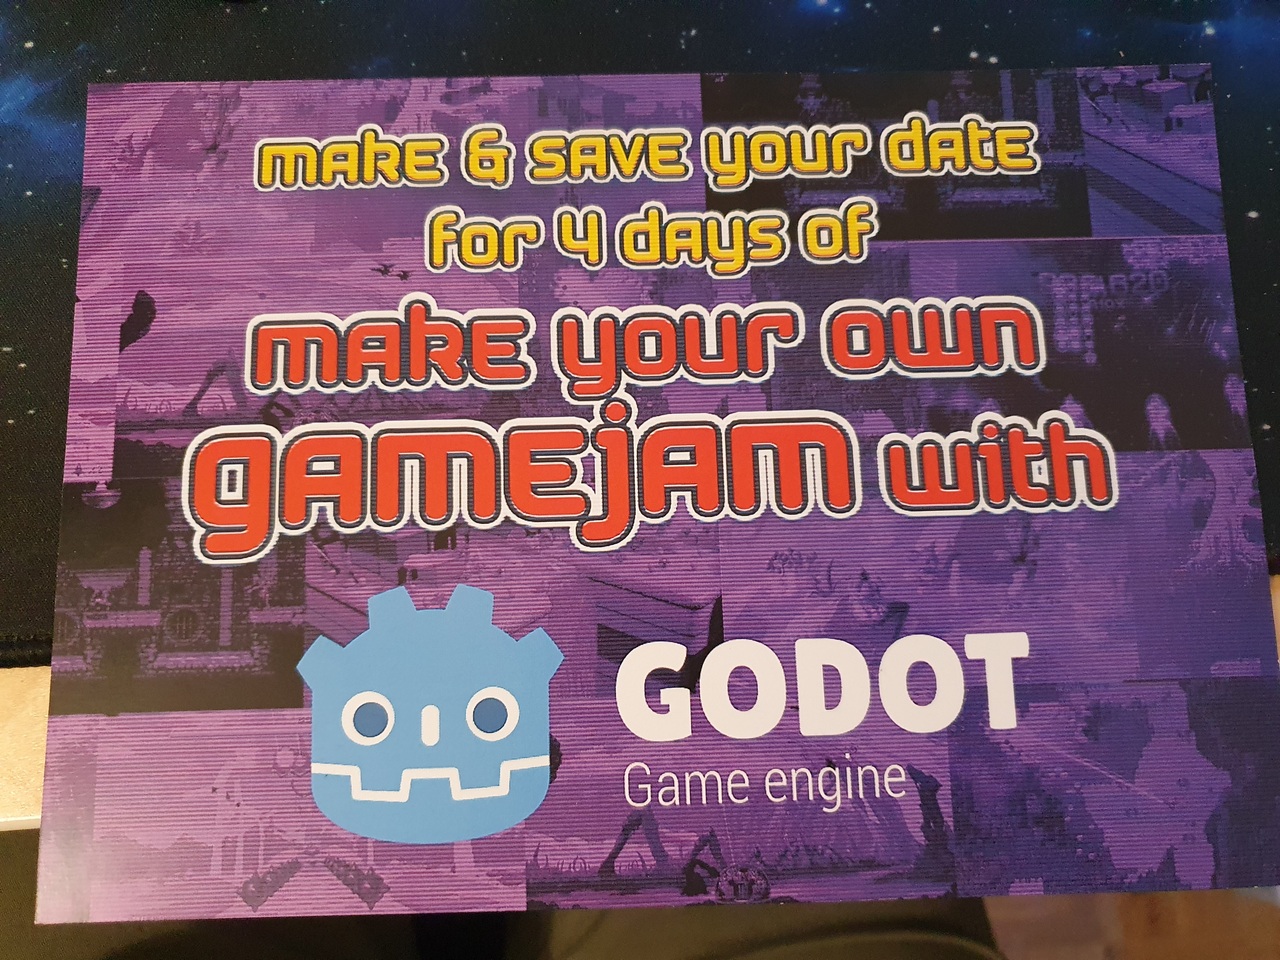 A coupon saying &ldquo;Make and save your date for 4 days of Make Your Own Gamejam with Godot Game Engine&rdquo;